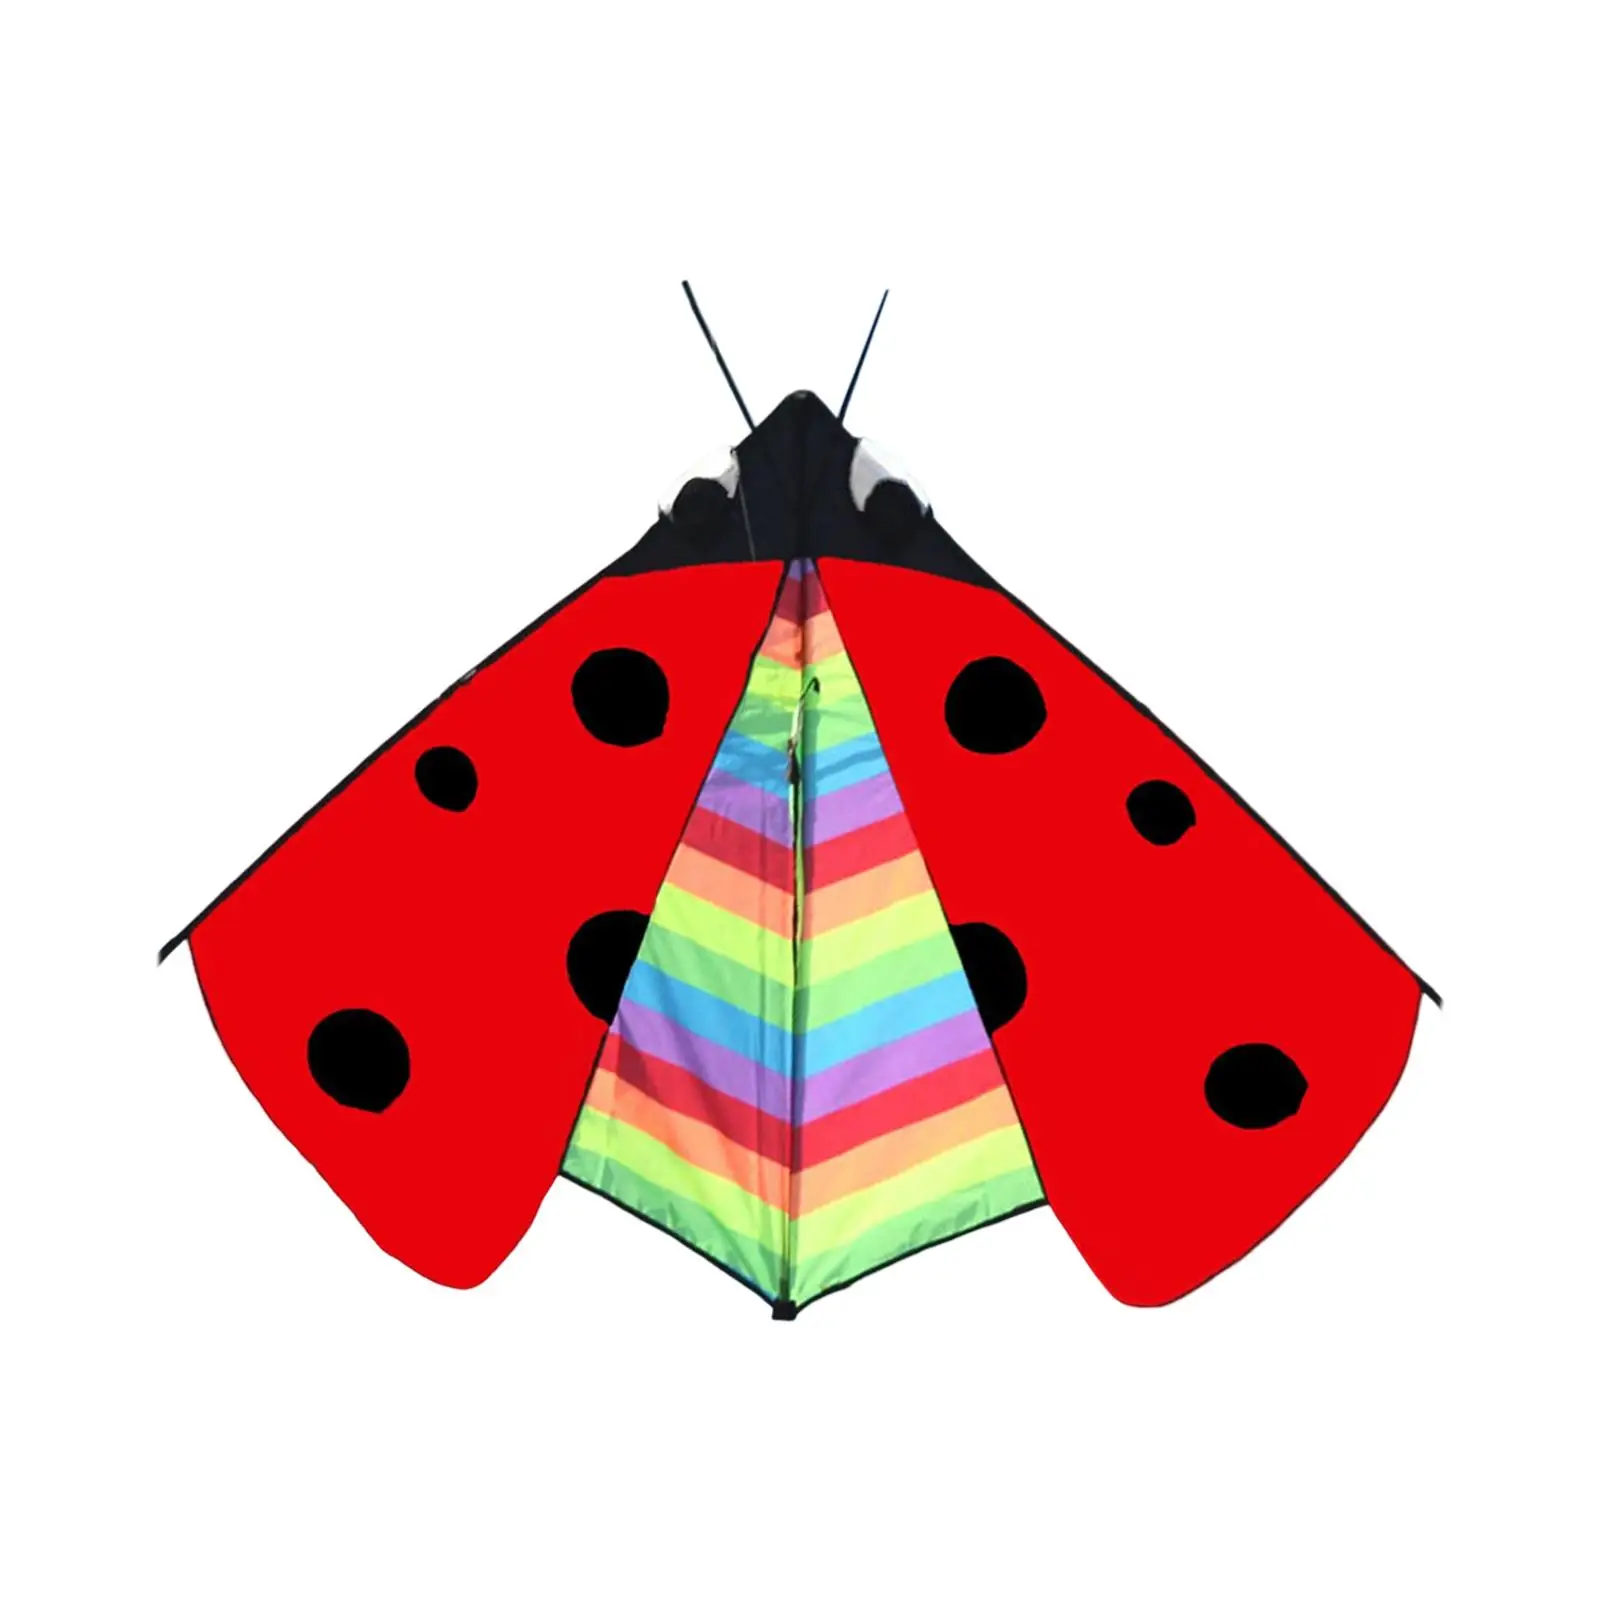 Novelty Triangle Ladybug Kite Fly Kite Huge Wingspan Easy Control Single Line Fun Toy Delta Kite for Park Family Trips Sports